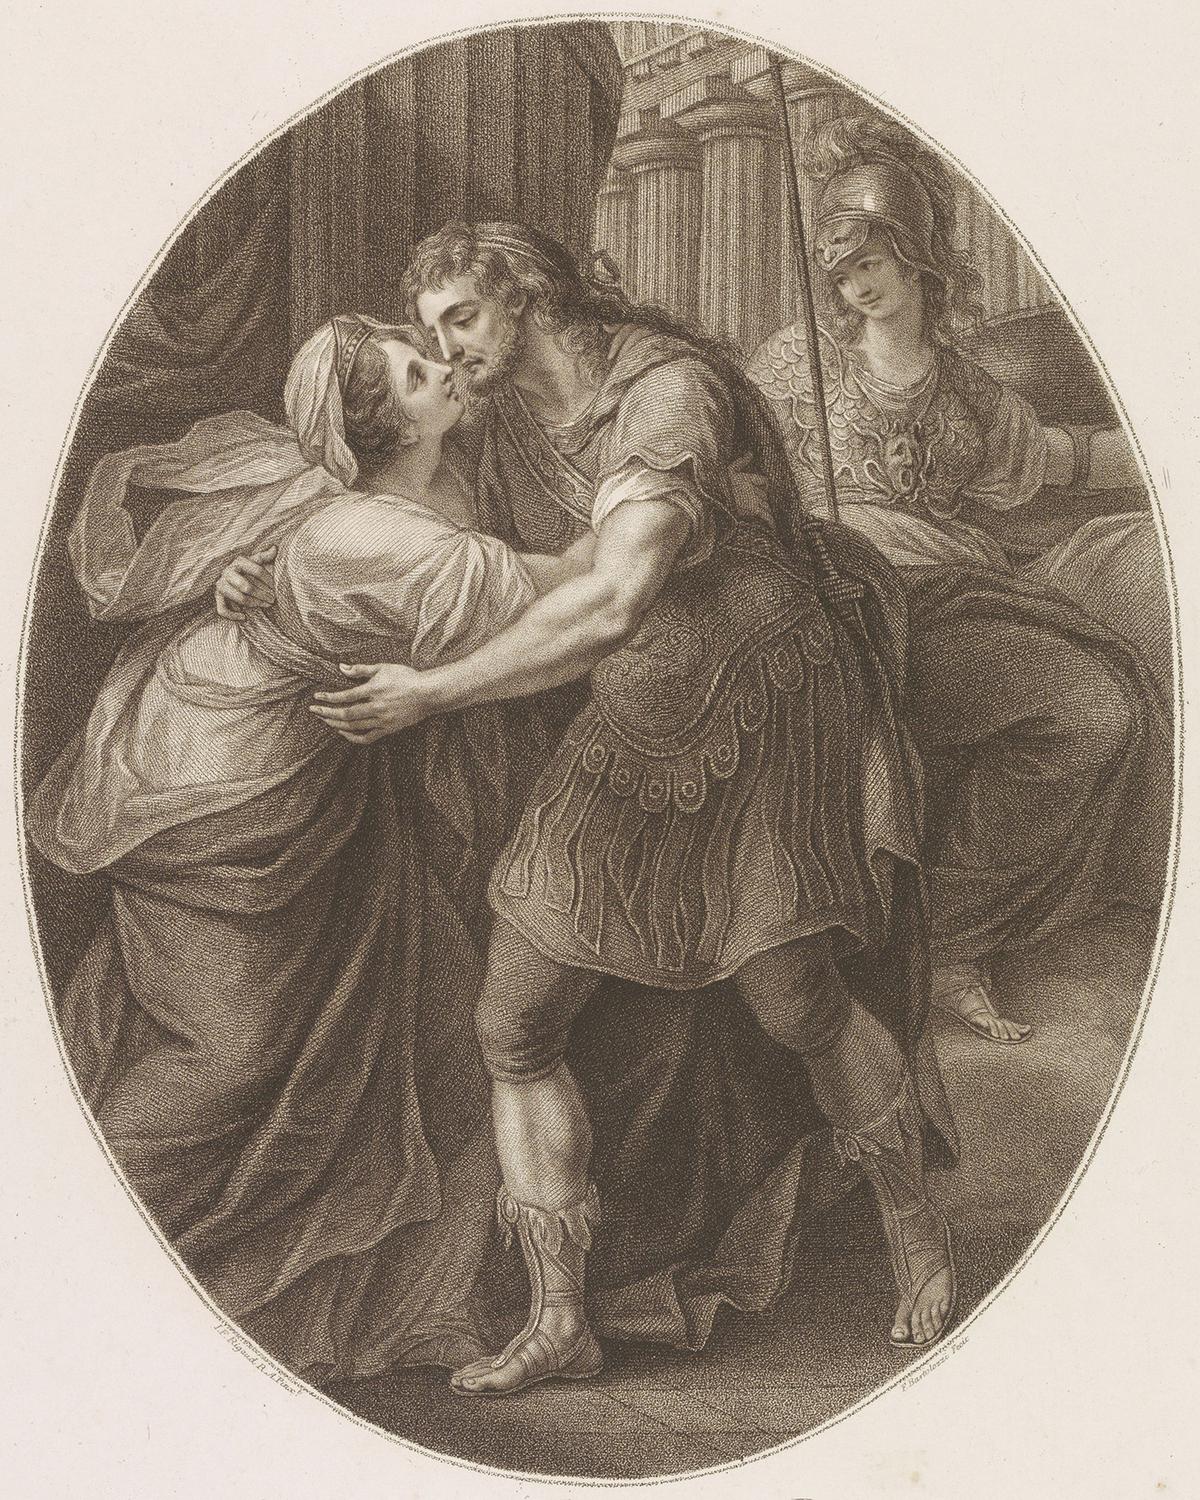 "The Meeting of Ulysses [Odysseus] and Penelope," 1788, by Francesco Bartolozzi, after John Francis Rigaud. Etching and dotted engraving on paper. Rijksmuseum, Amsterdam. (Public Domain)